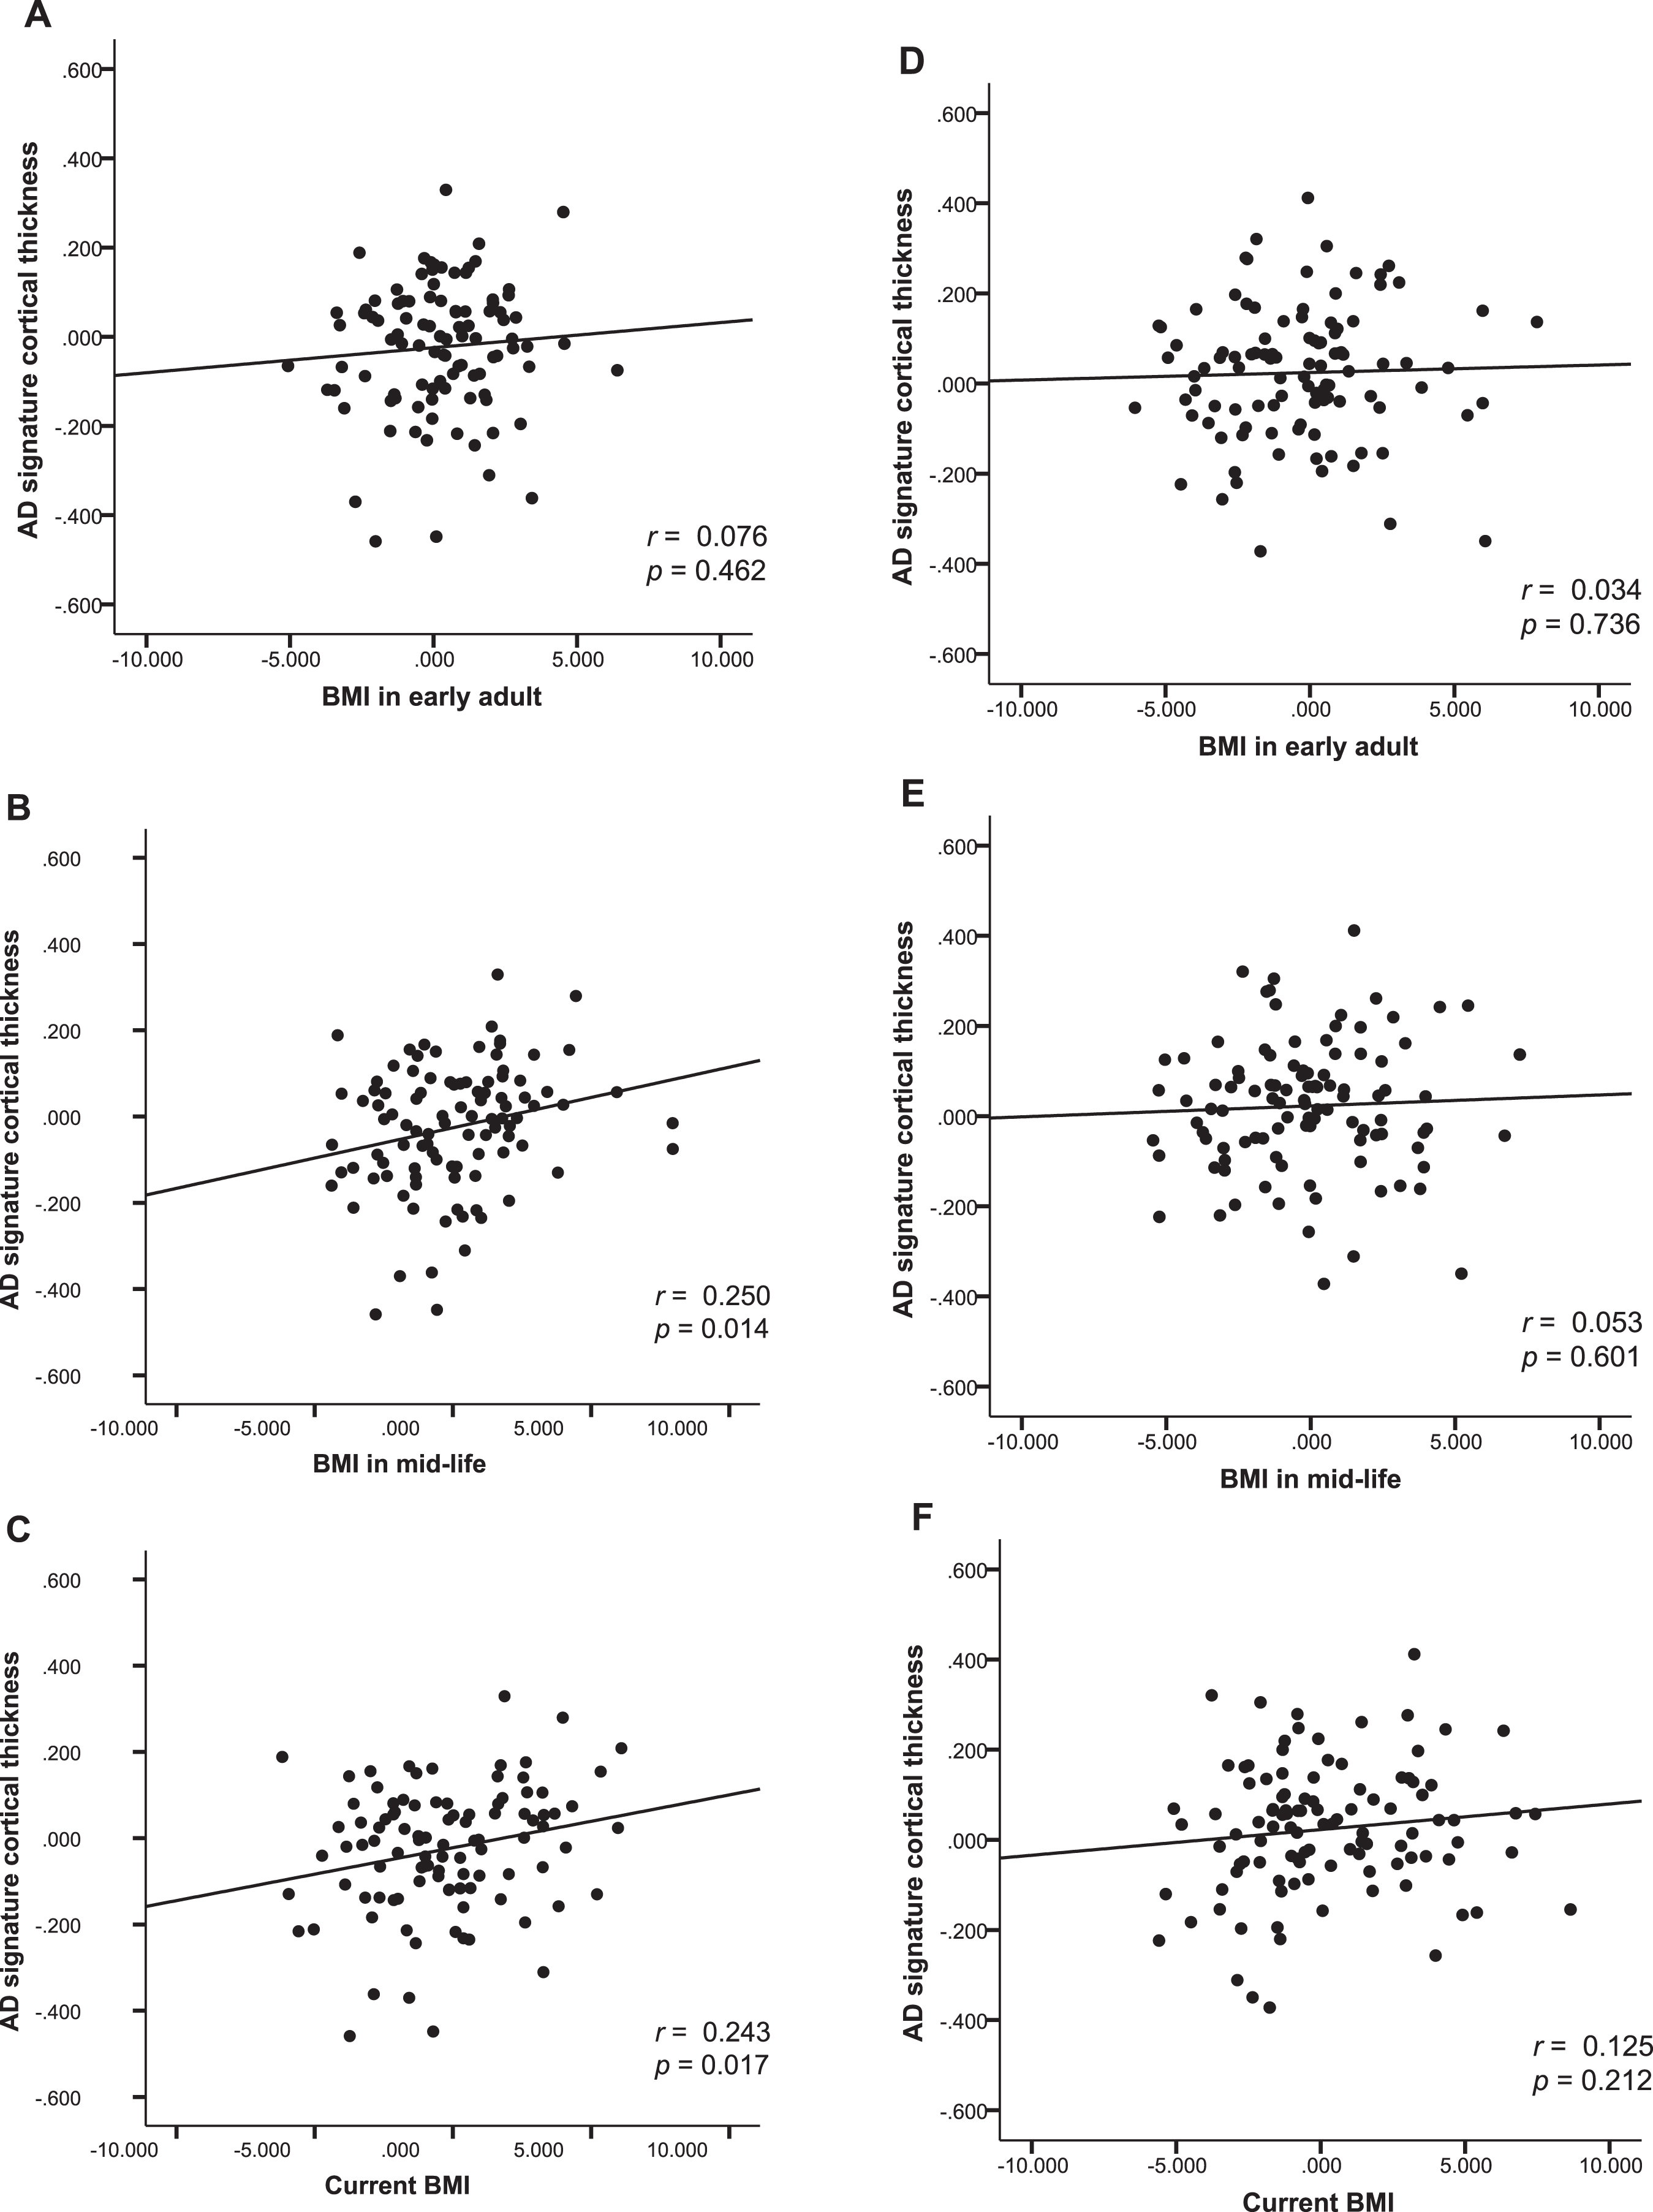 Body mass index and AD signature cortical thickness. Partial regression plot showing relationships between past and current BMIs and AD signature cortical thickness after adjusting for covariates in males (A, B, C), and females (D, E, F).